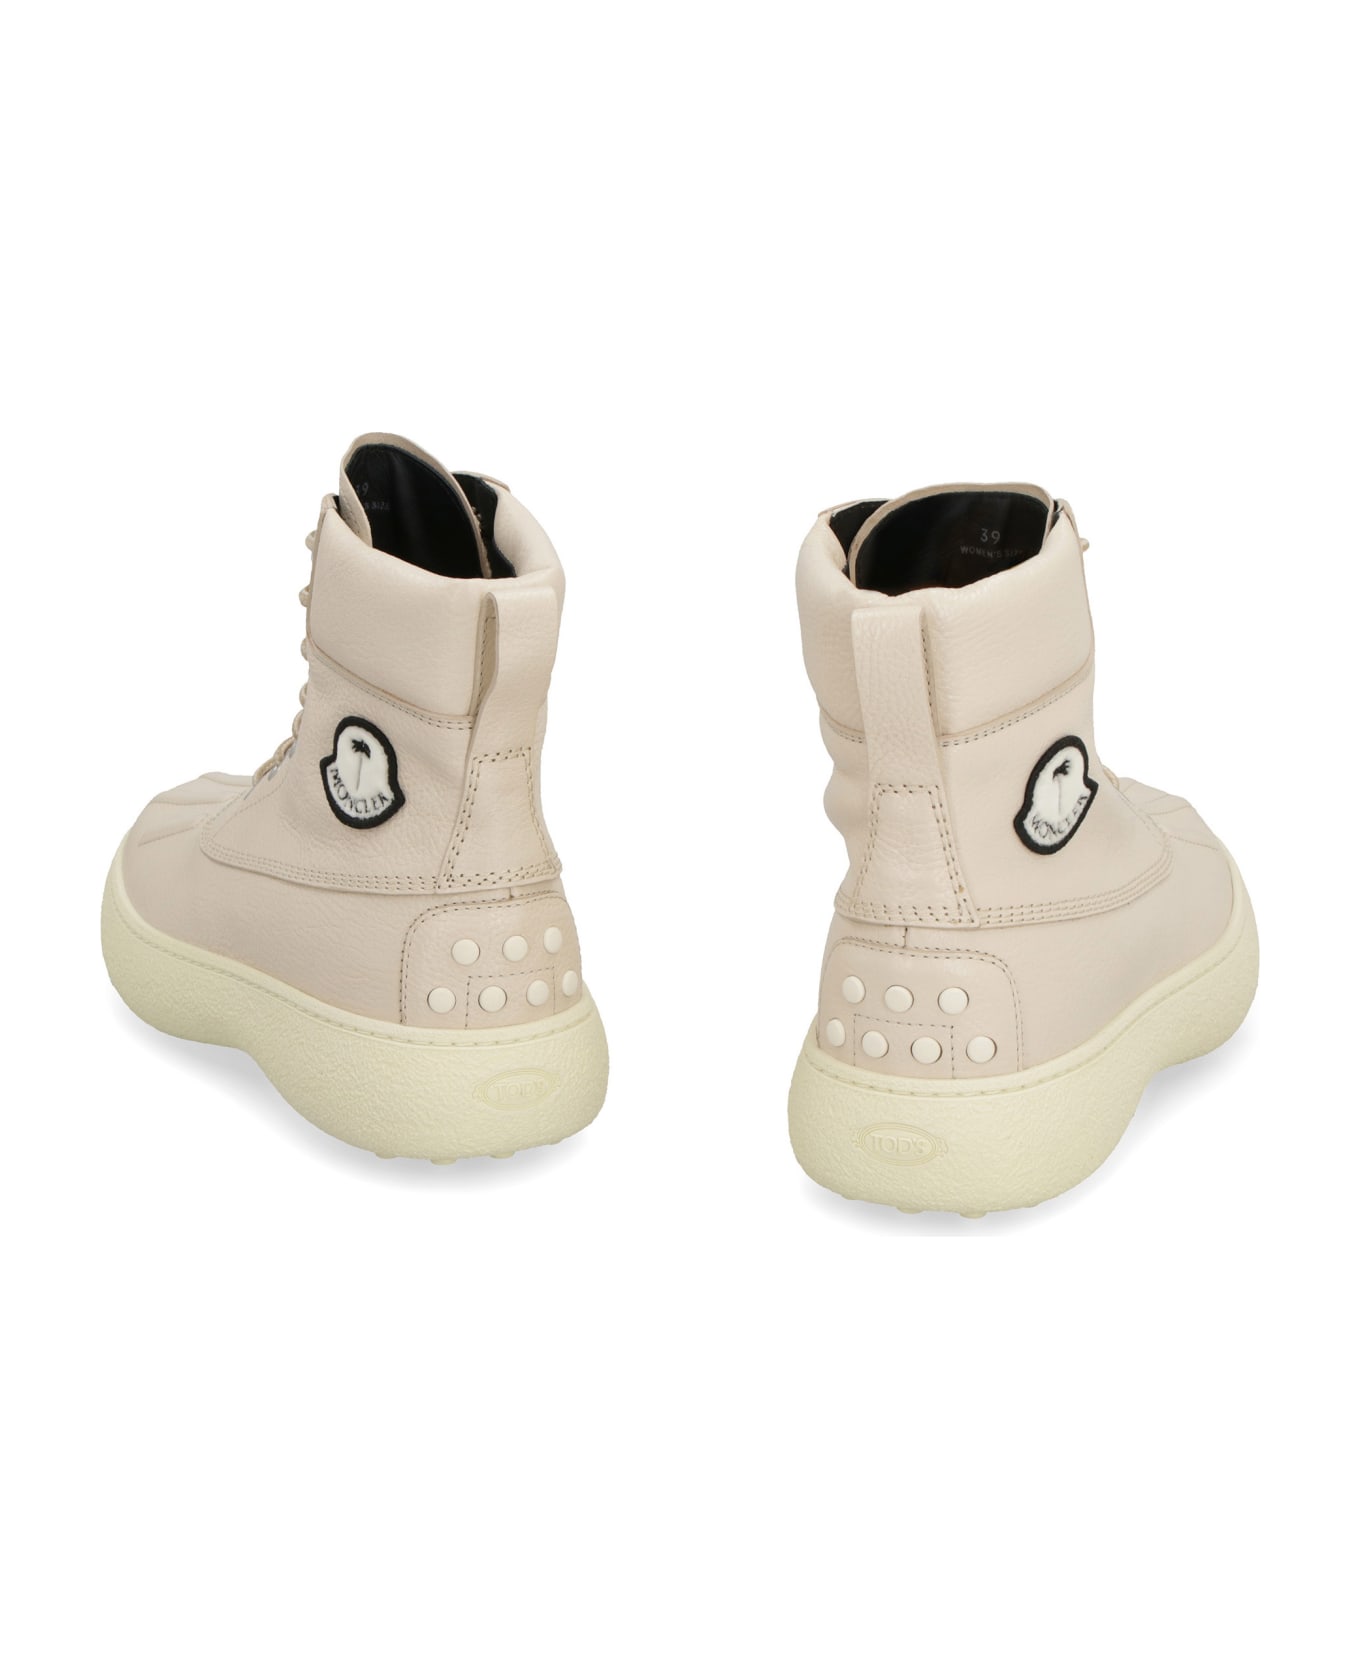 Moncler Genius Tod's X 8 Moncler Palm Angels - W.g. Lace-up Ankle Boot - Beige